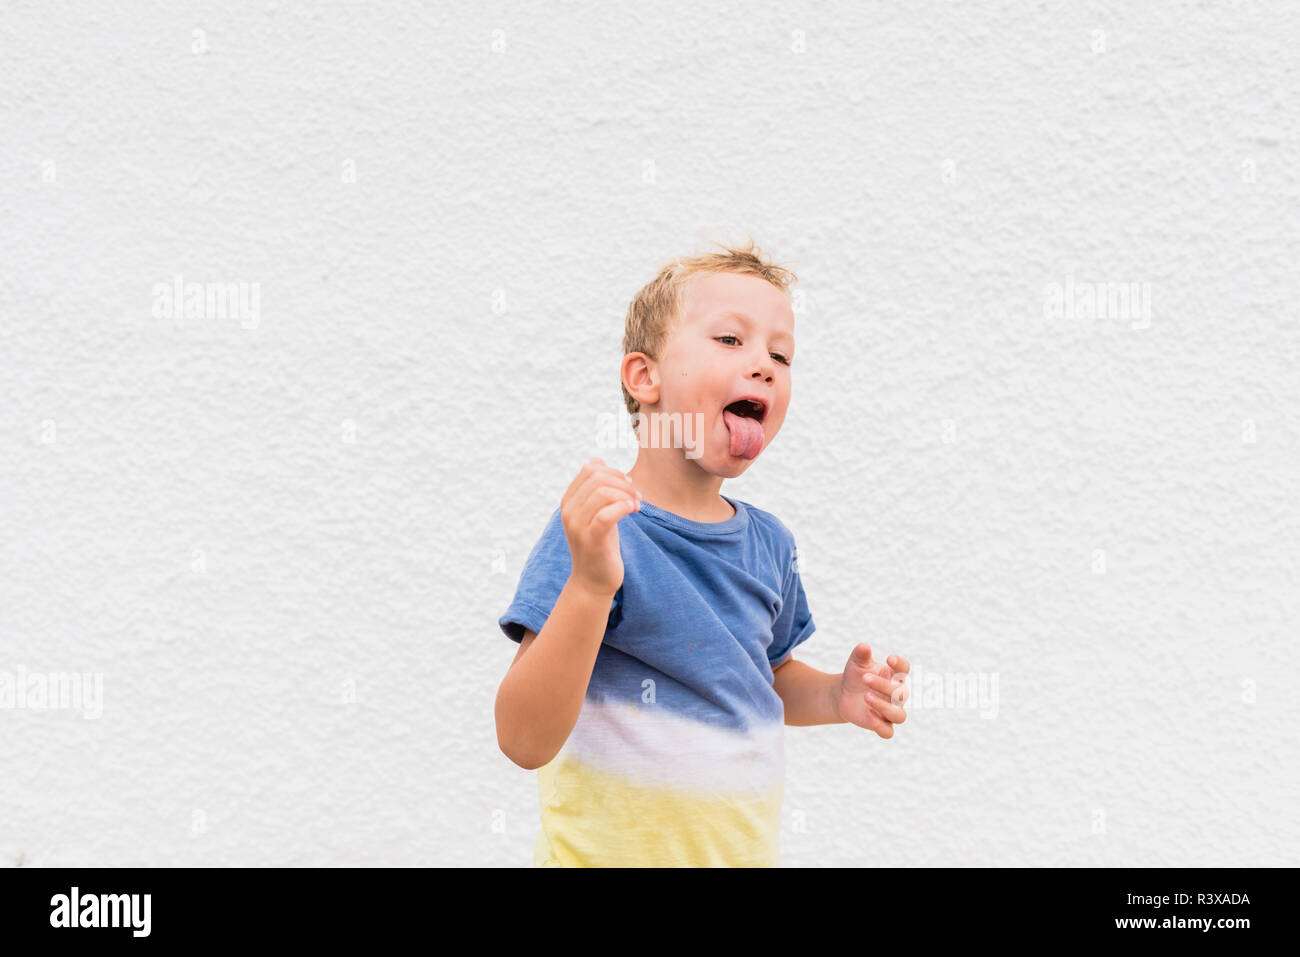 Blond boy making funny faces on white background. Stock Photo